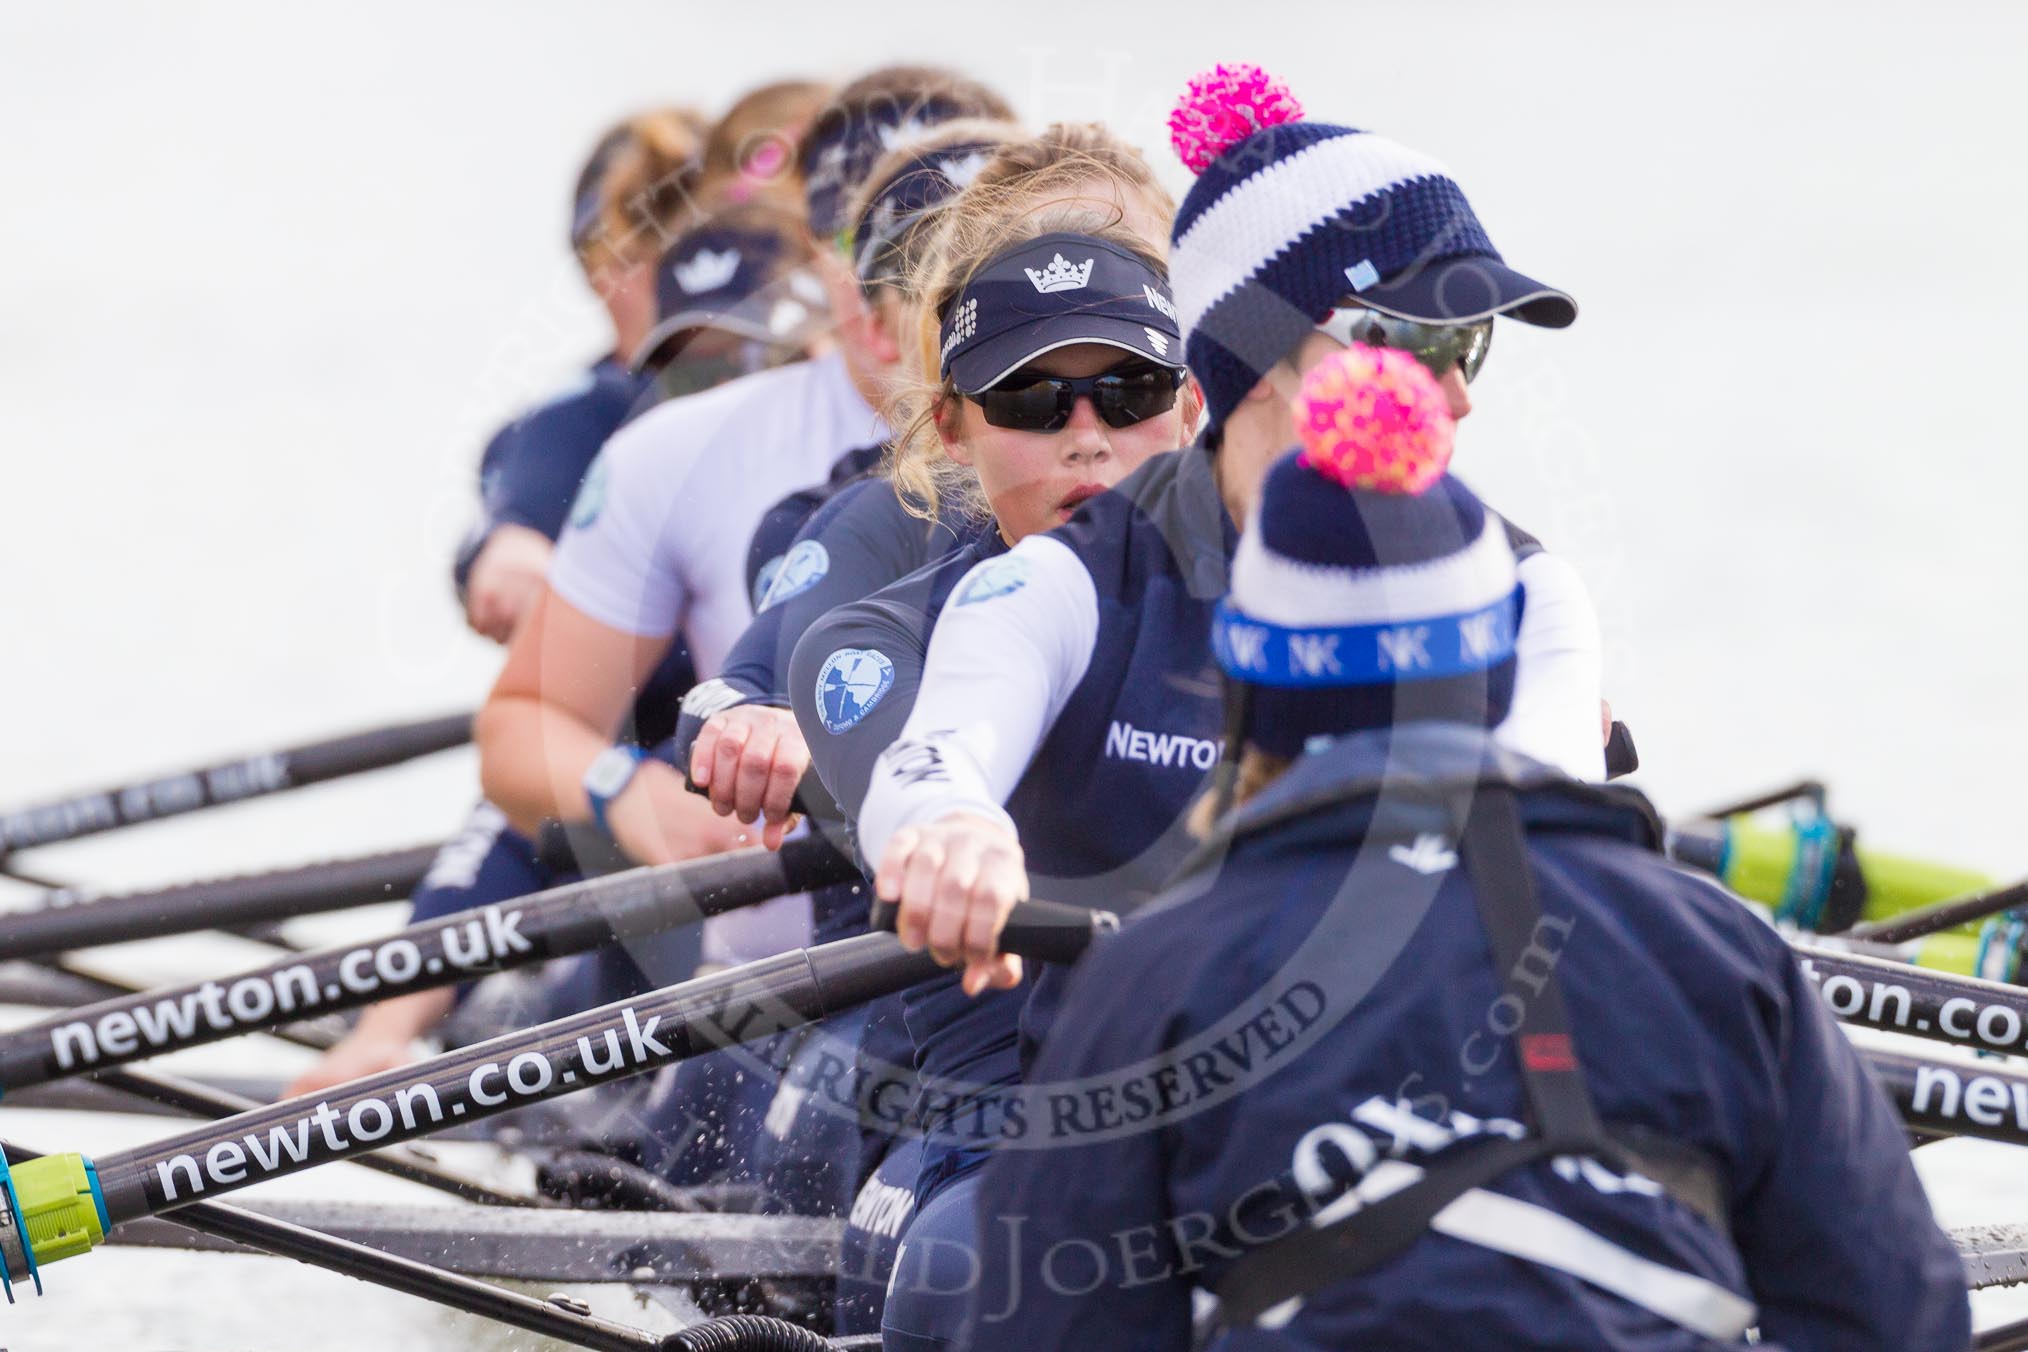 The Boat Race season 2015: OUWBC training Wallingford.

Wallingford,

United Kingdom,
on 04 March 2015 at 15:44, image #52